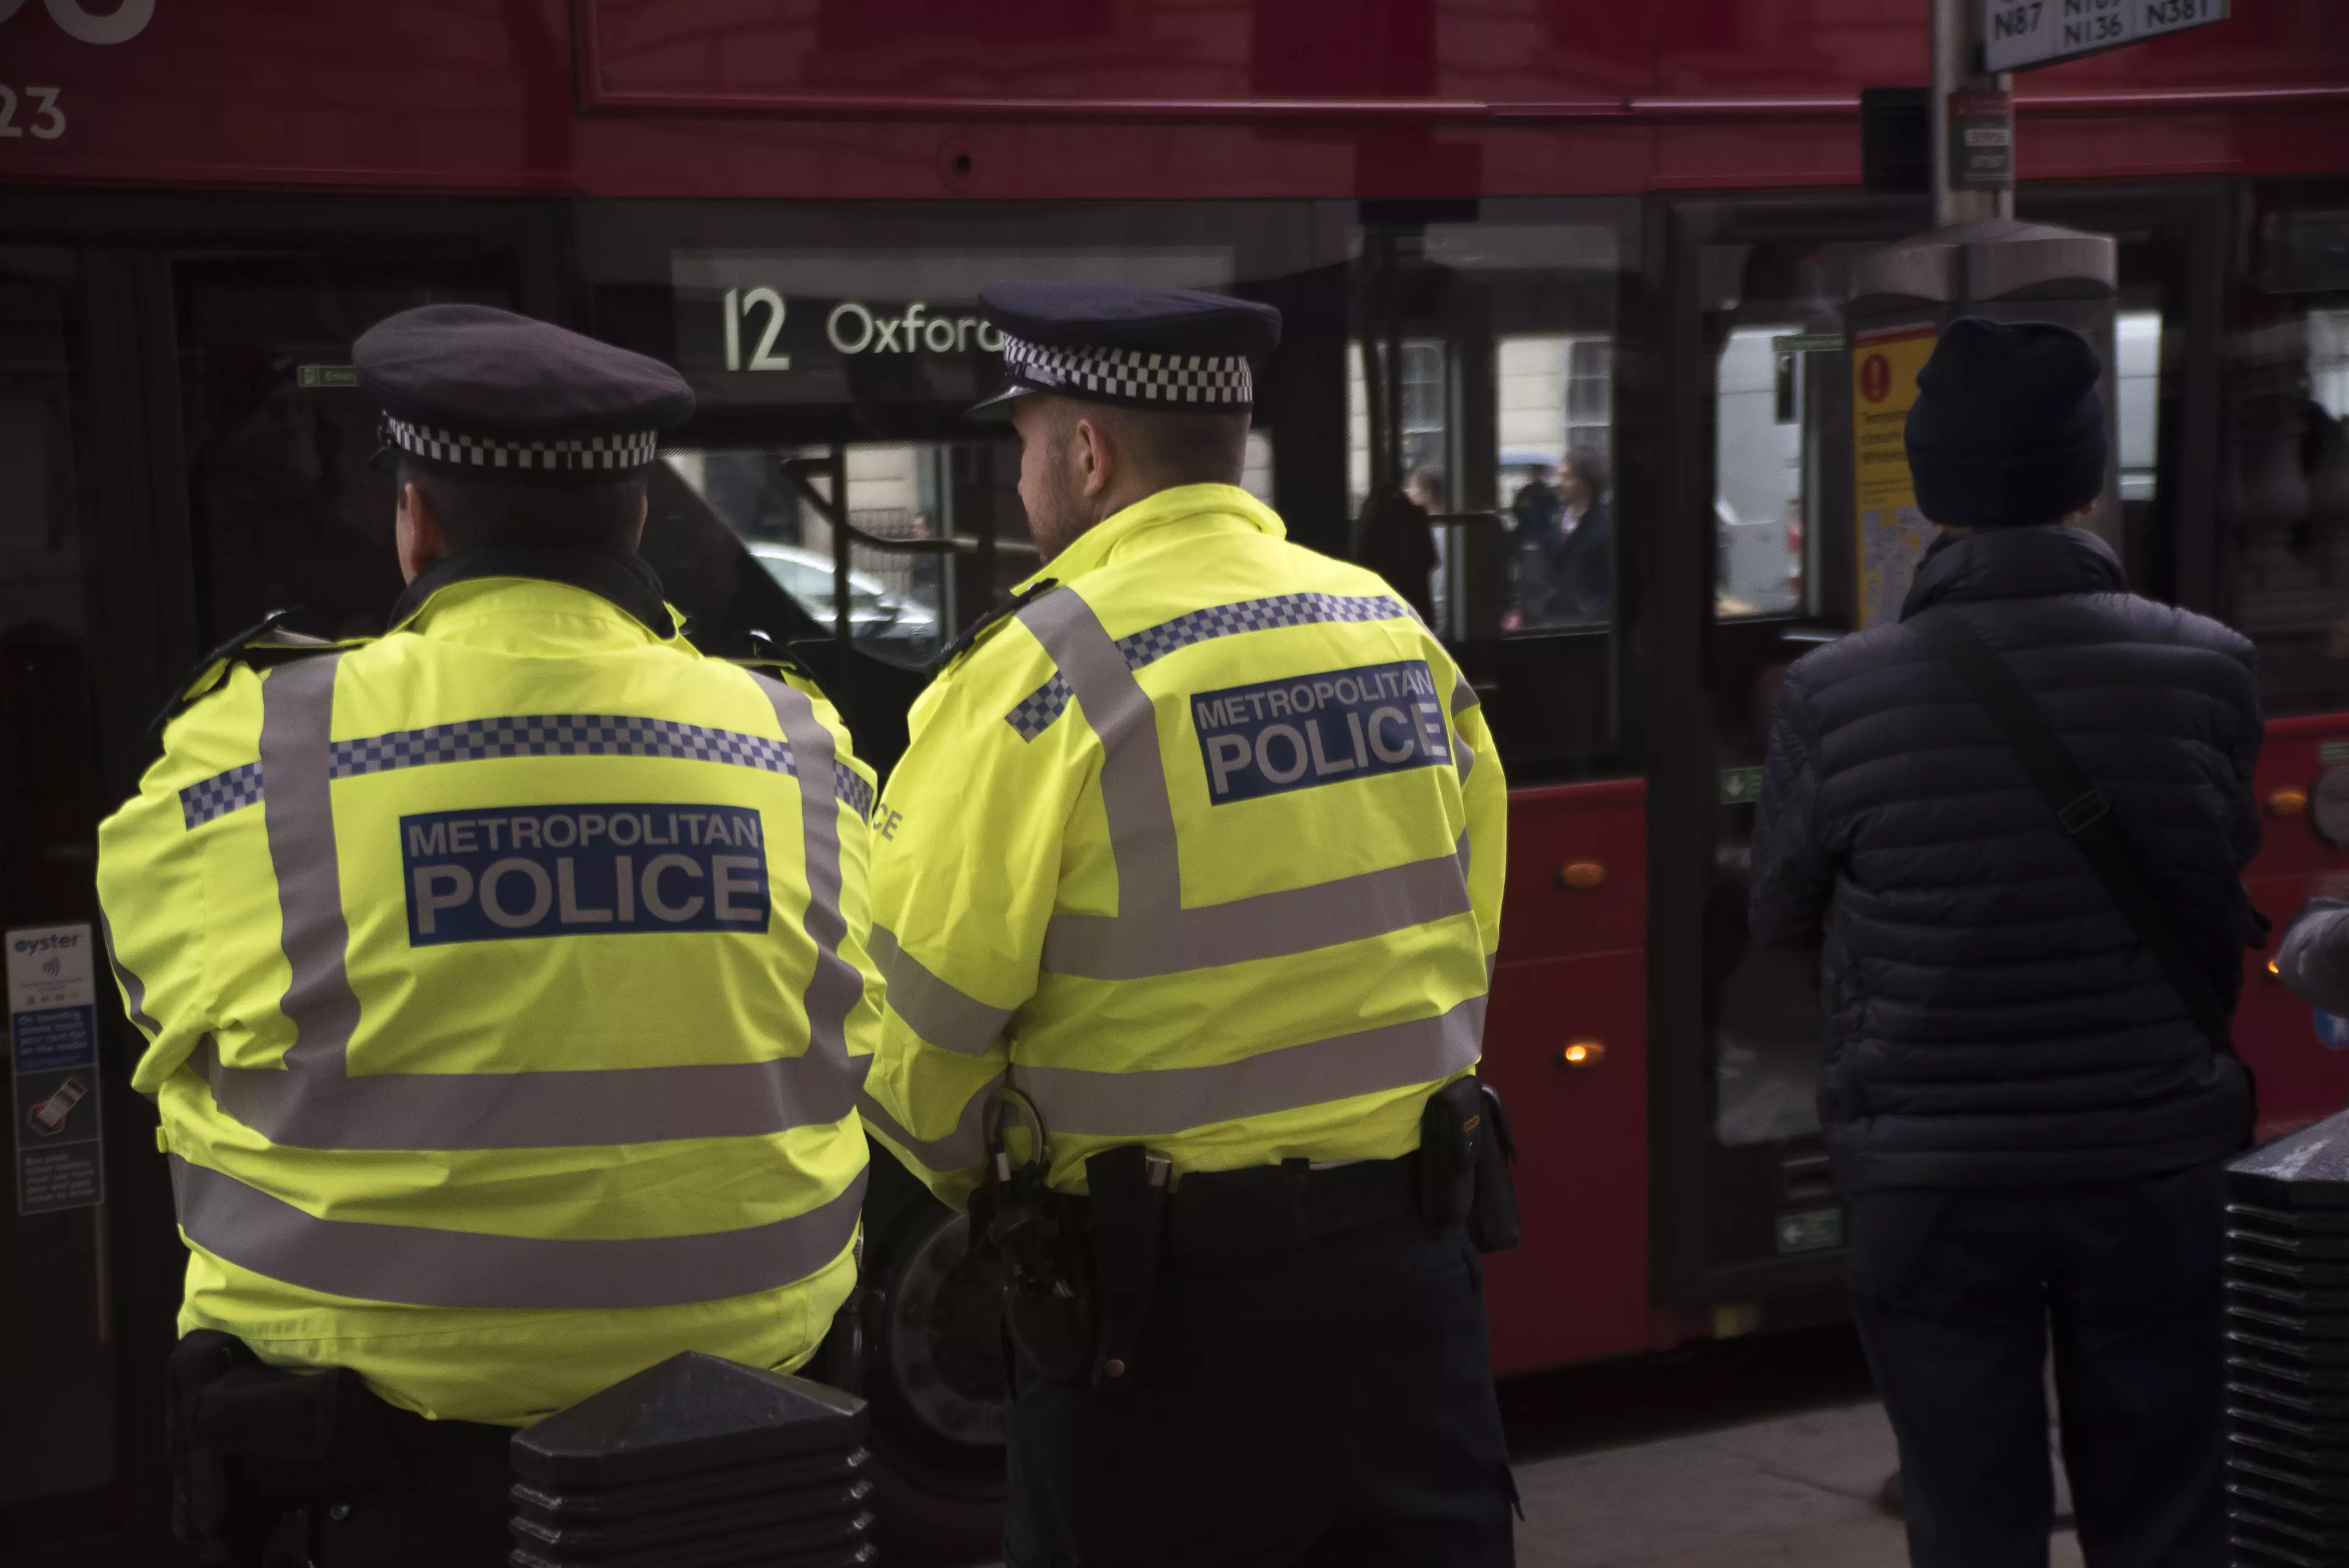 UK Police Forces Considering Classing Misogyny As Hate Crime